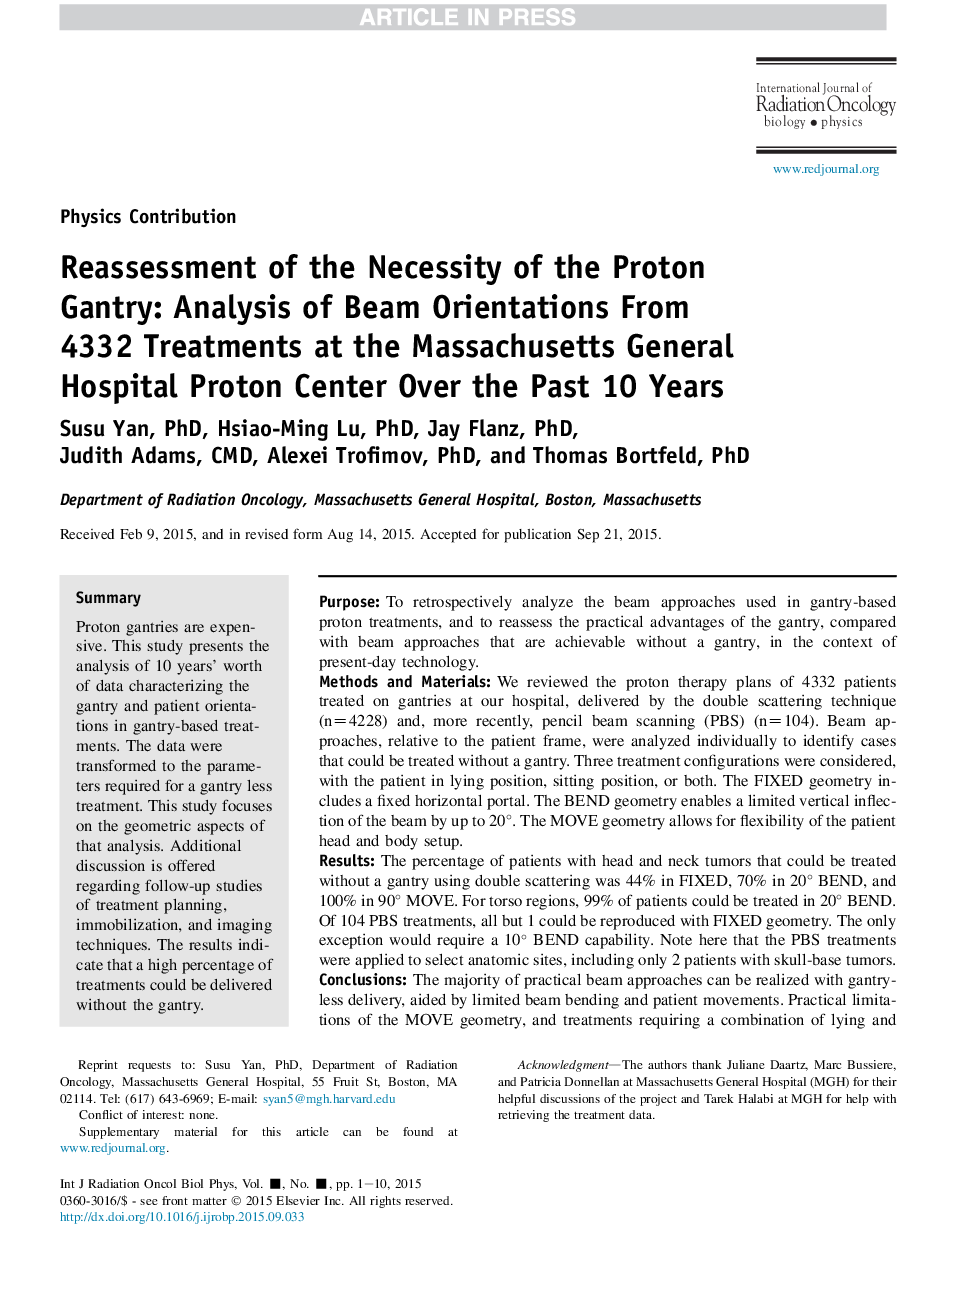 Reassessment of the Necessity of the Proton Gantry: Analysis of Beam Orientations From 4332 Treatments at the Massachusetts General Hospital Proton Center Over the Past 10Â Years